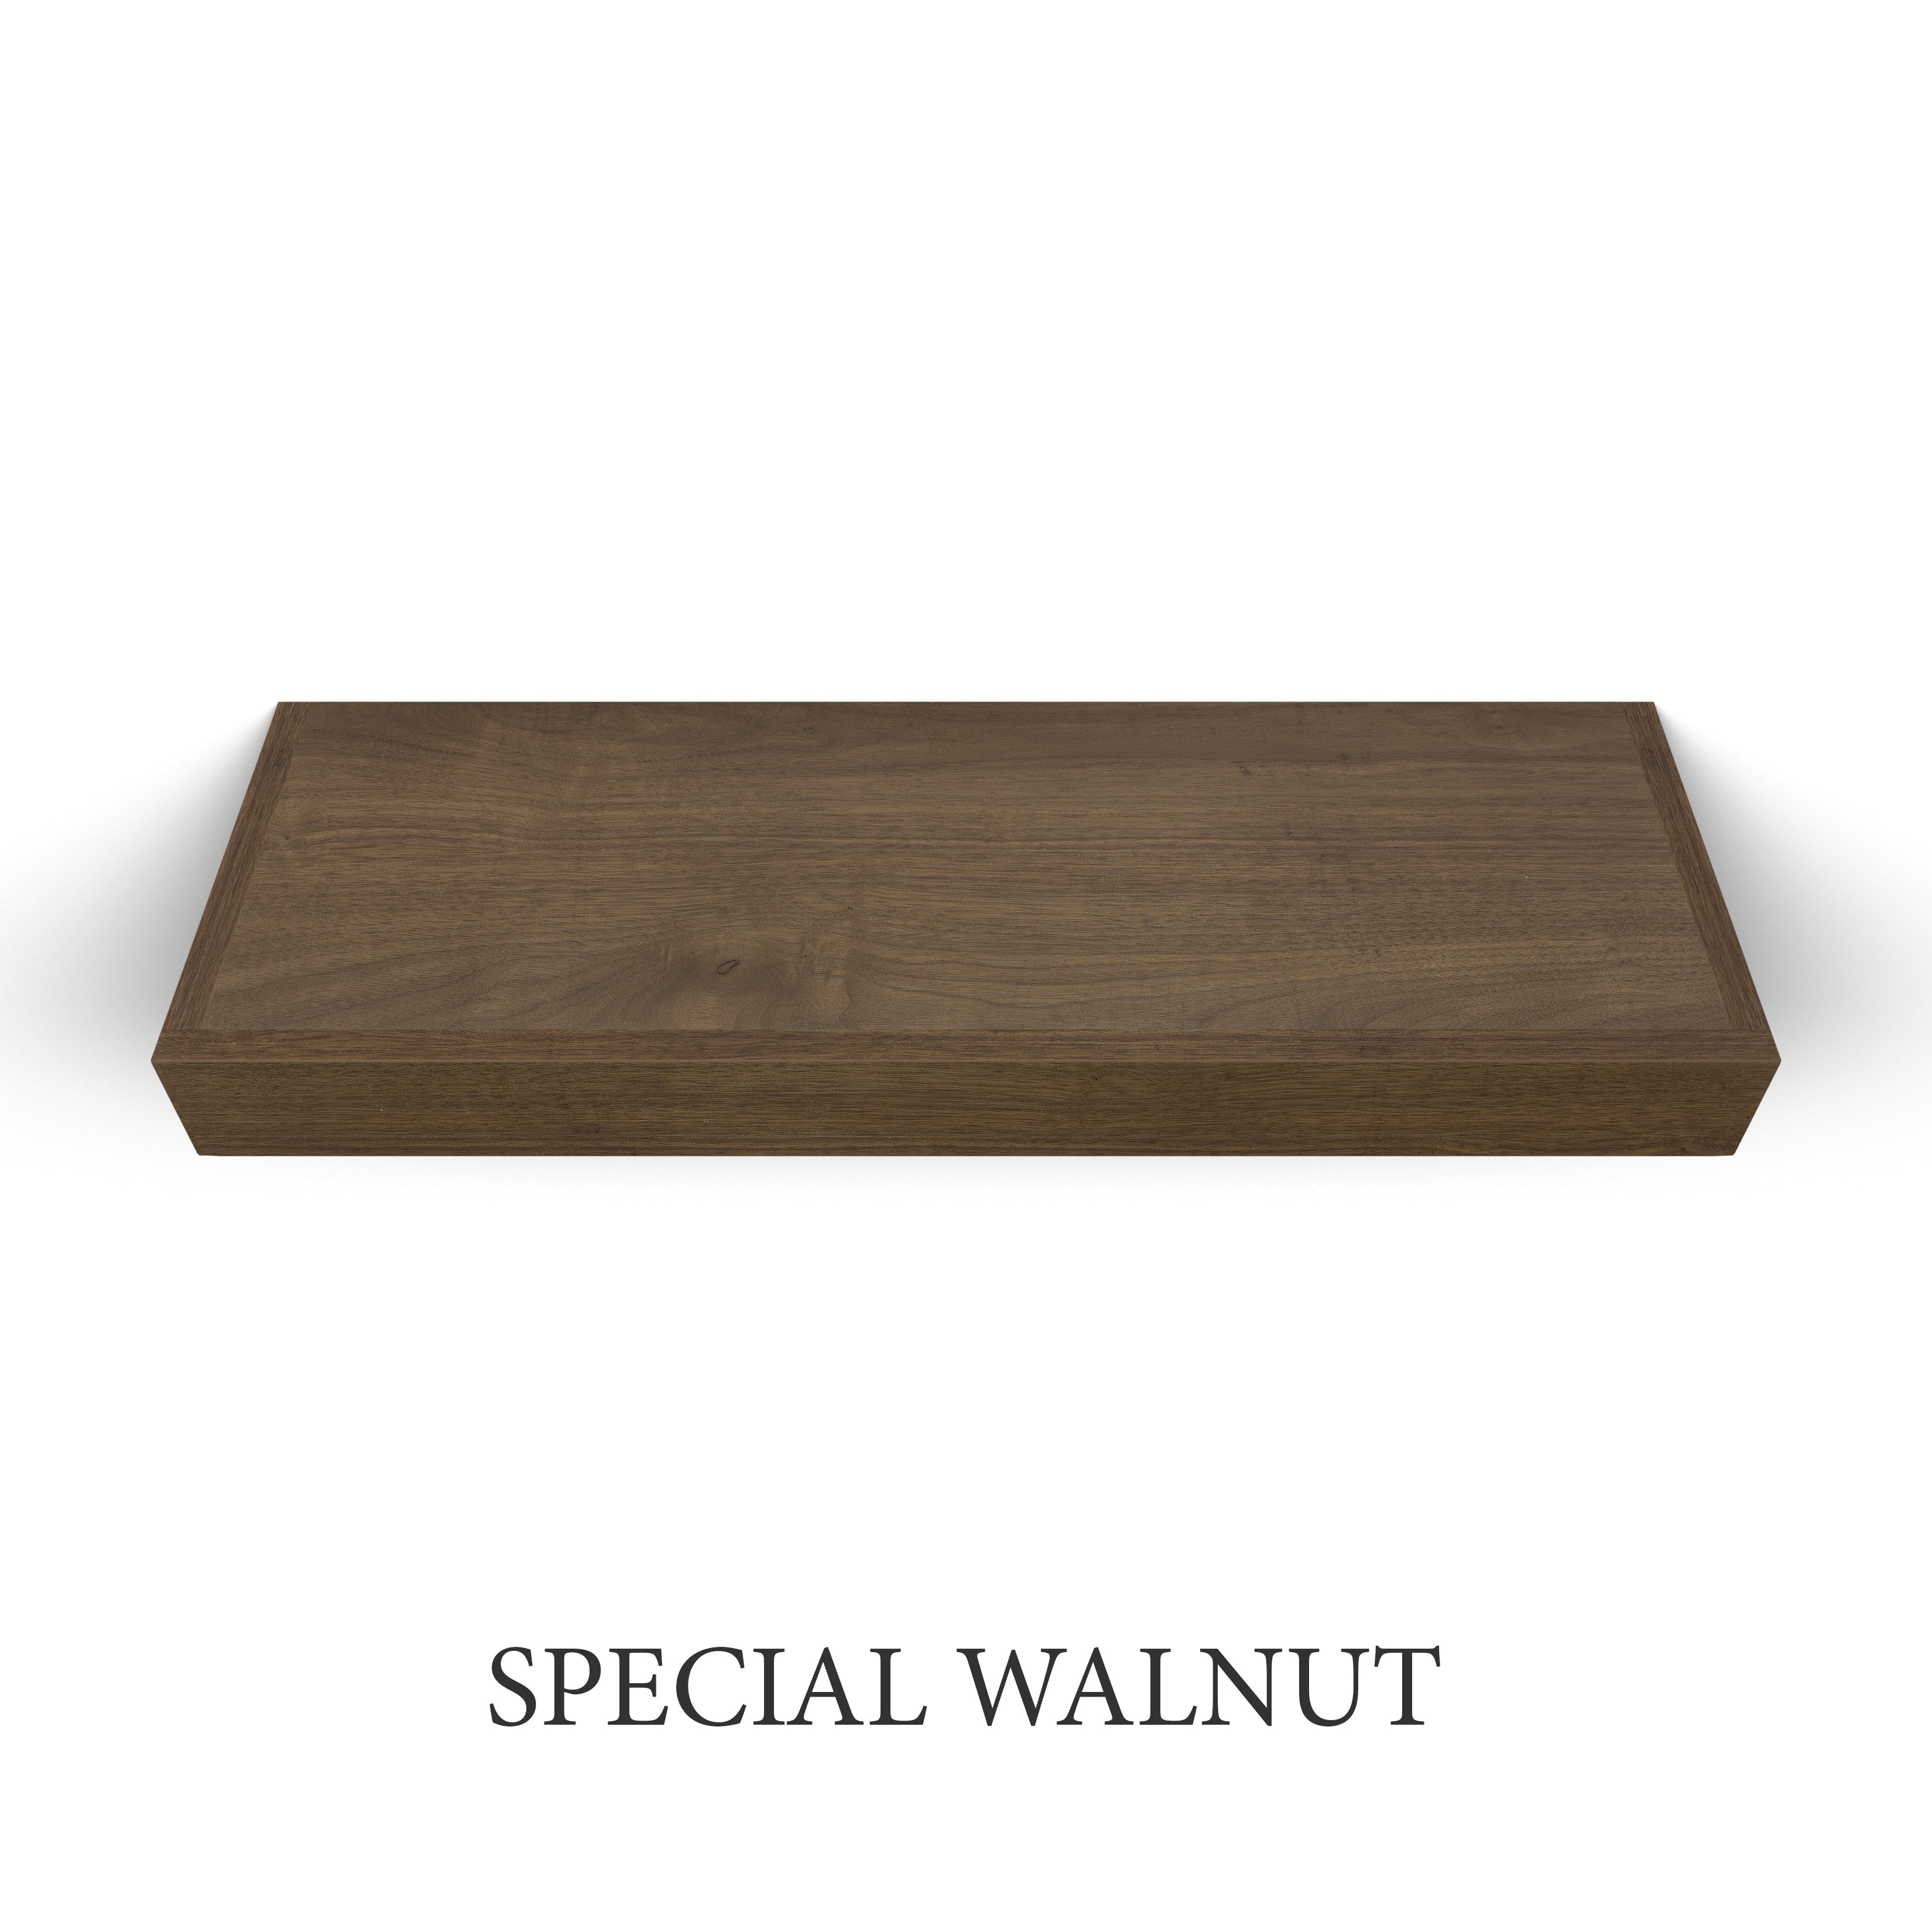 special walnut Walnut 3 Inch Thick LED Lighted Floating Shelf - Battery